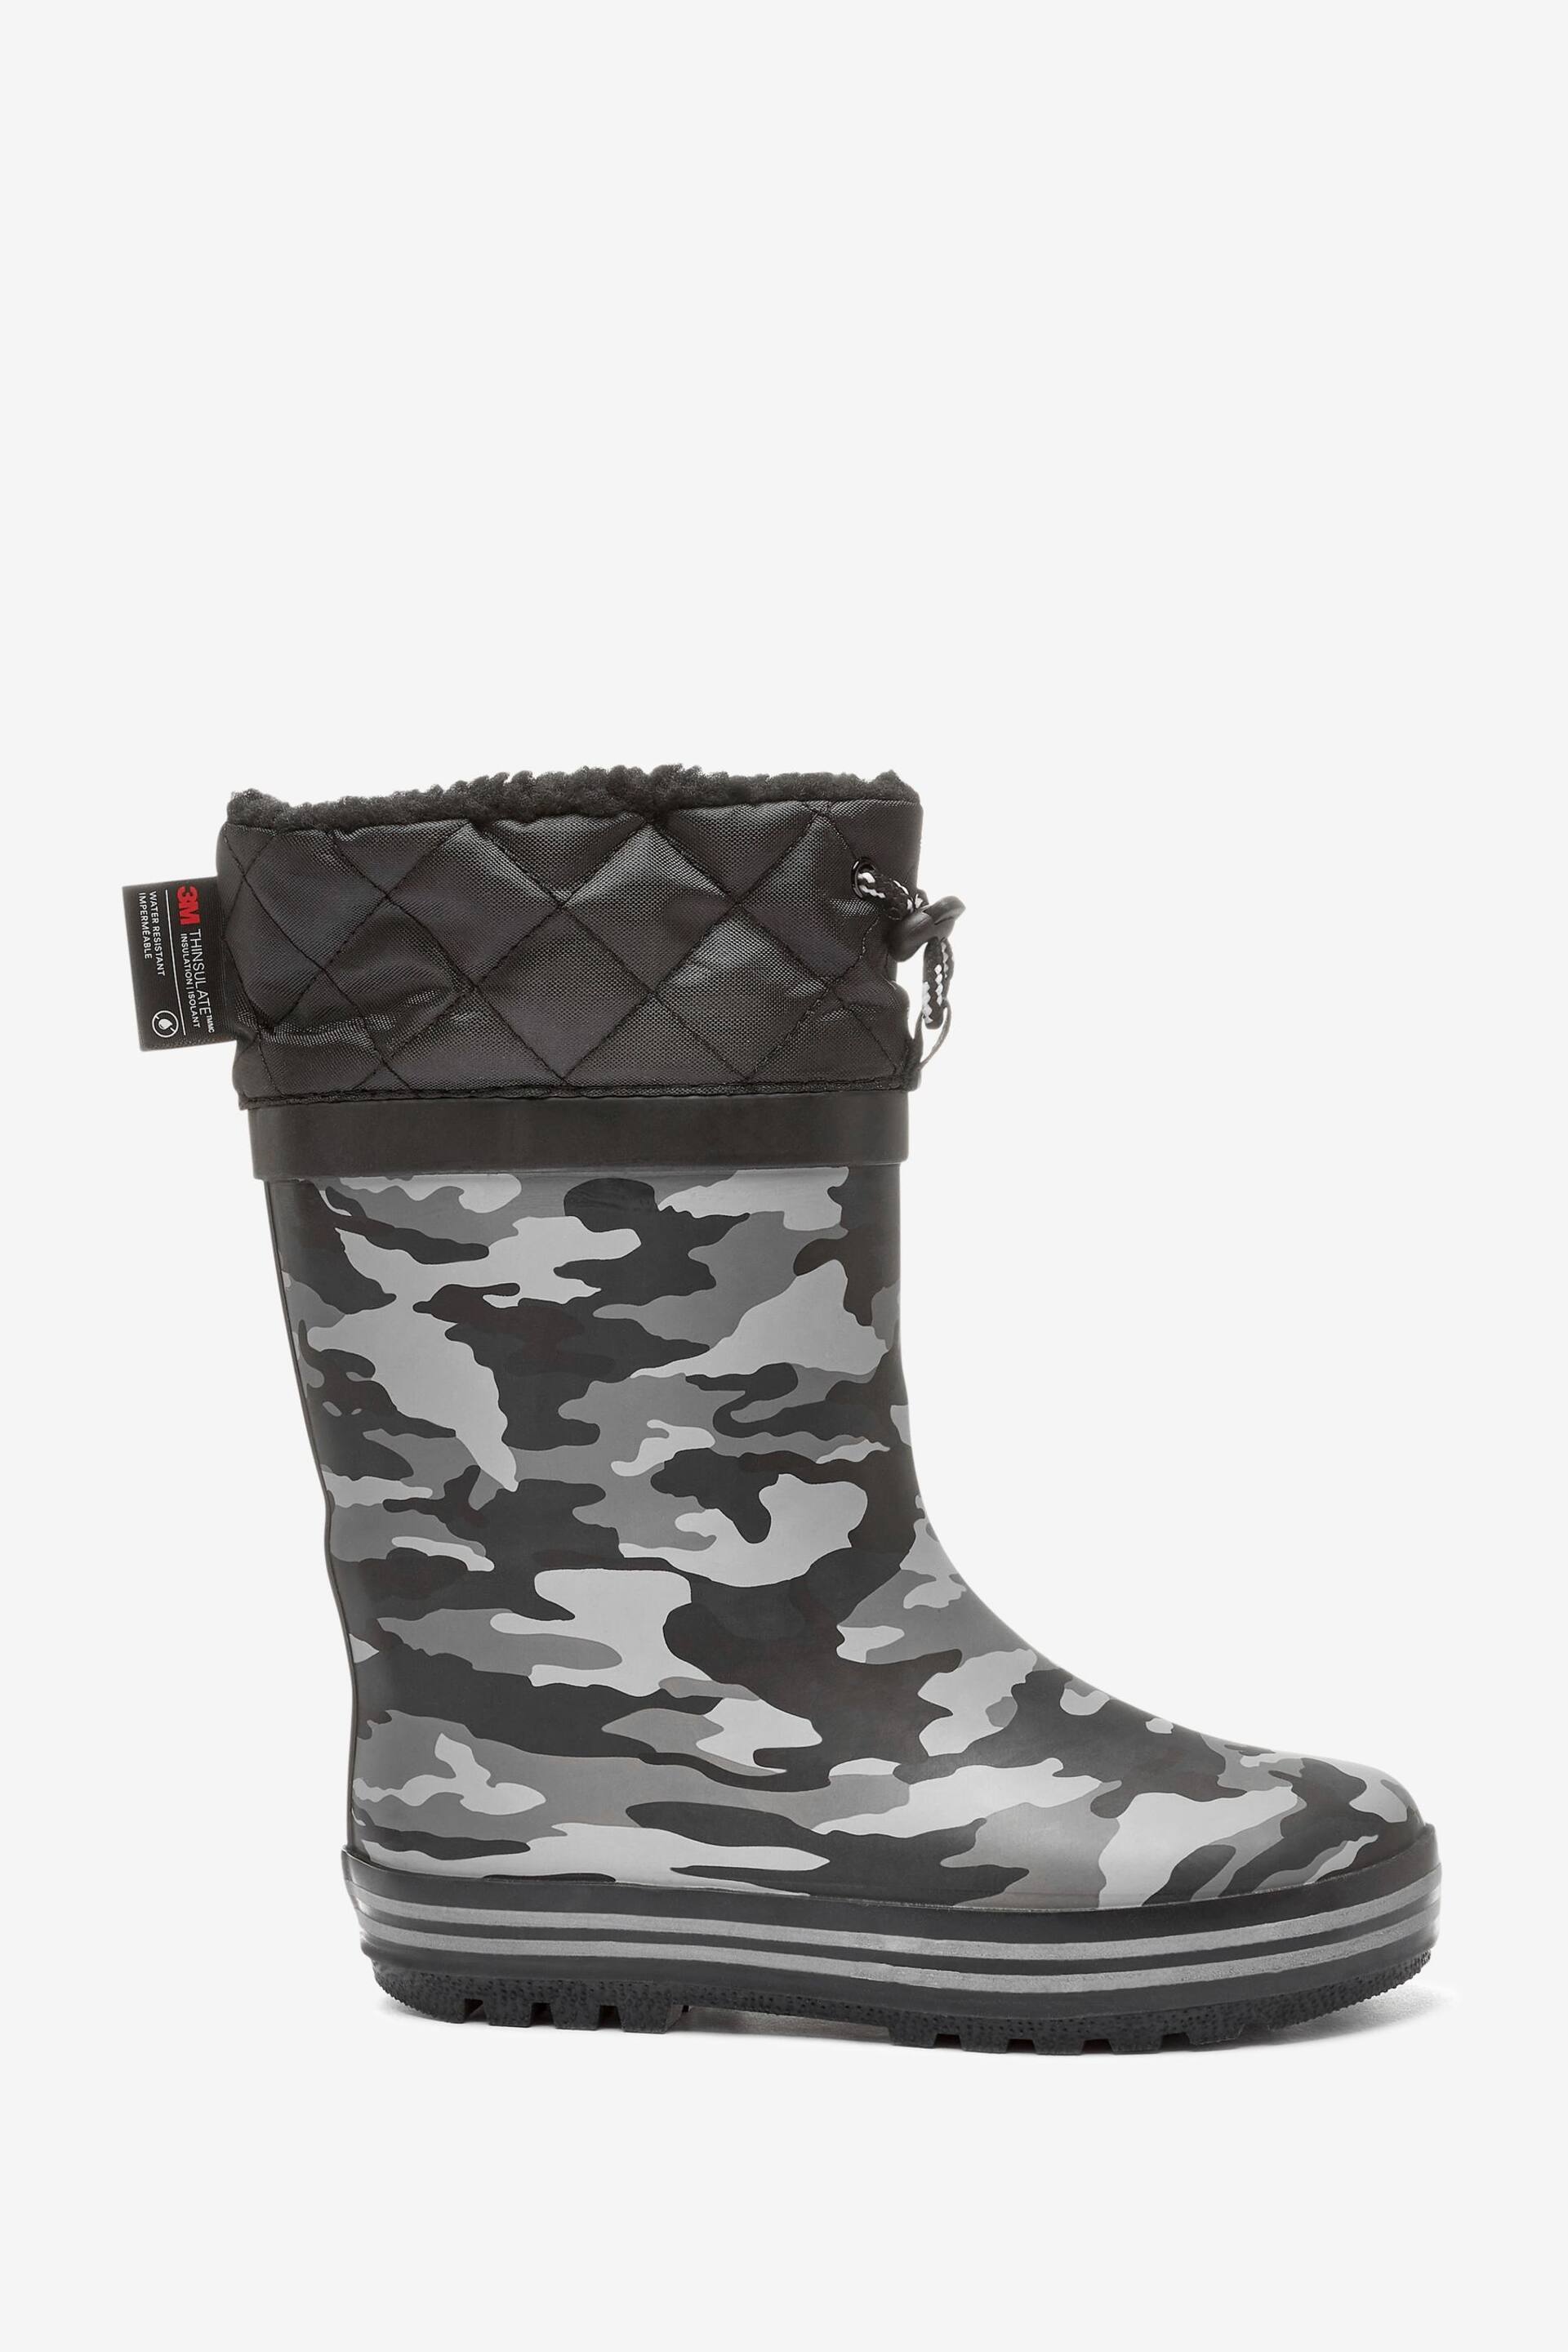 Monochrome Camouflage Thinsulate™ Warm Lined Cuff Wellies - Image 2 of 8